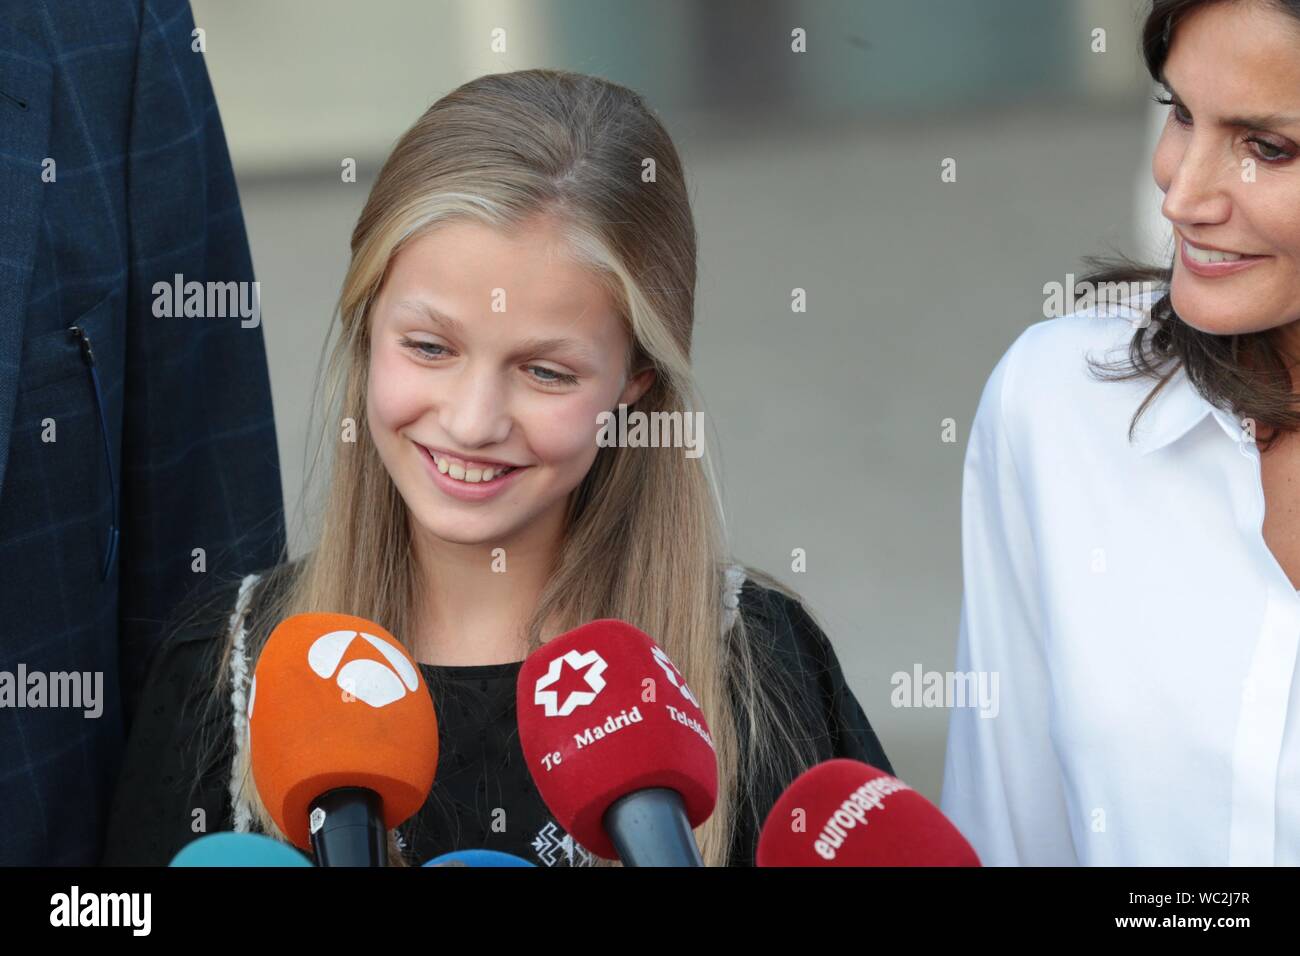 Madrid, Spain. 27th Aug, 2019. Princess Leonor.Felipe VI and Letizia Reyes de España speak with the press accompanied by their daughters Princess Leonor and the Infanta Sofia in the hospital after visiting King Juan Carlos I, who is recovering from an open heart operation. Credit: dpa picture alliance/Alamy Live News Stock Photo